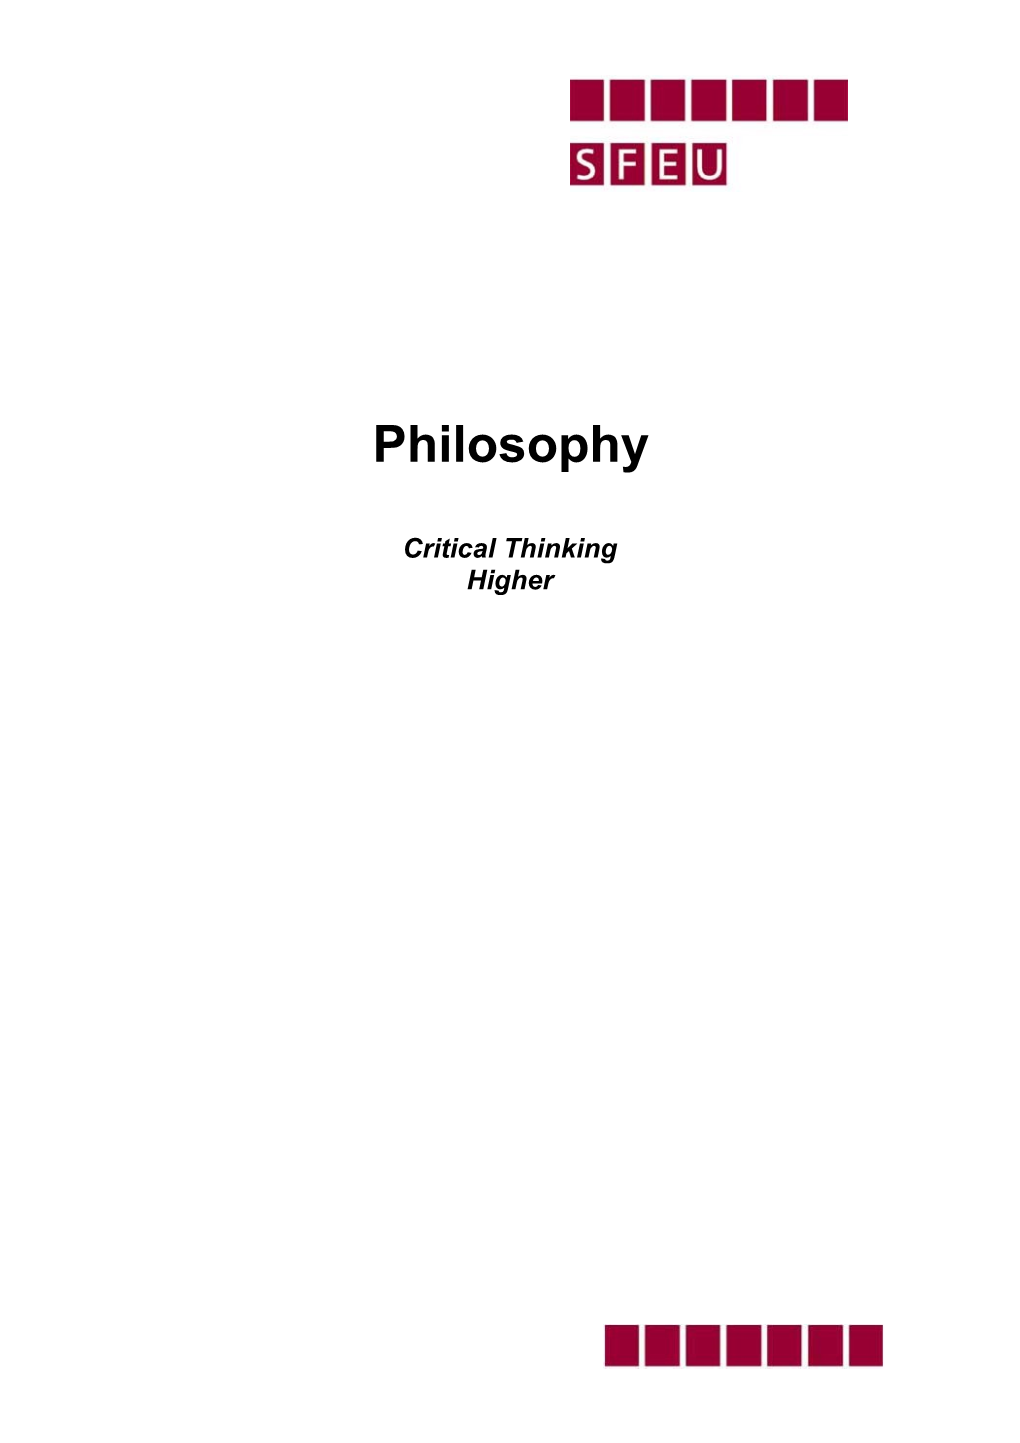 Philosophy: Critical Thinking for Higher